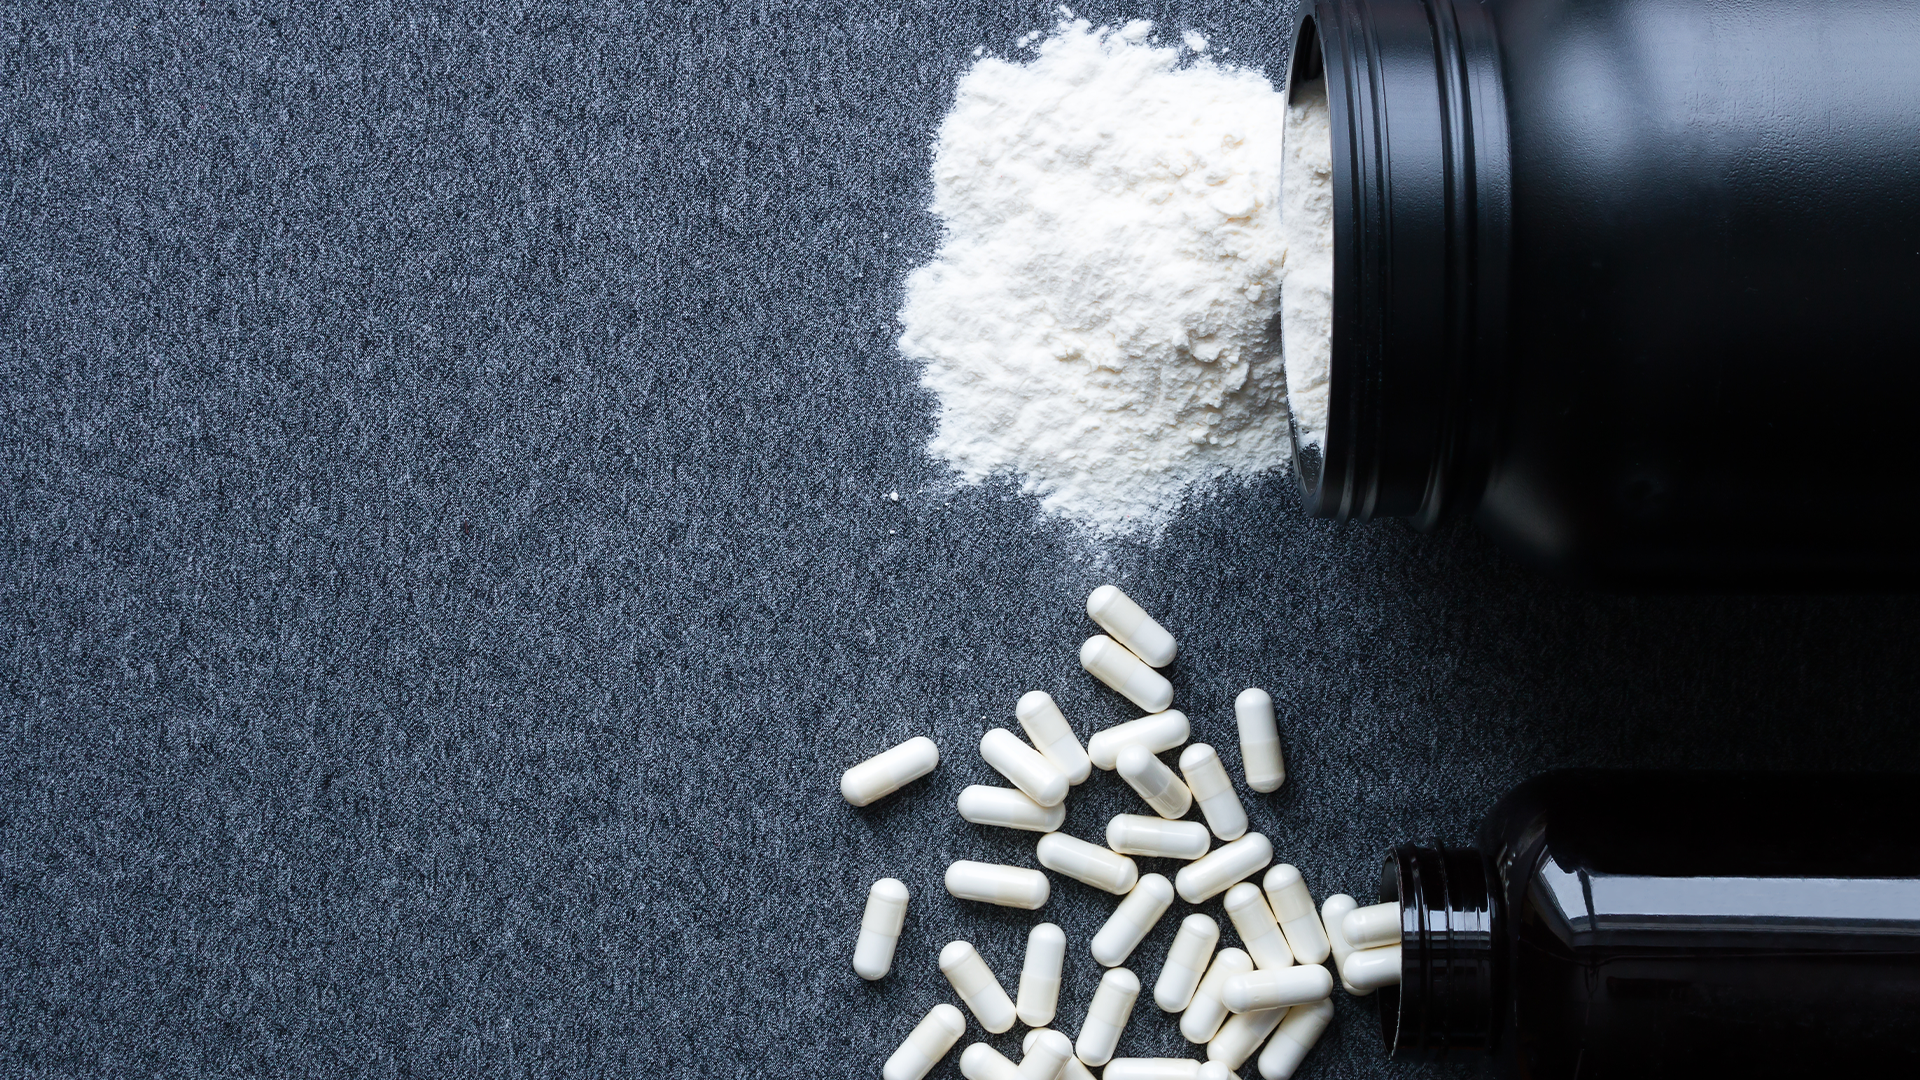 Legal Steroids And How Do They Work